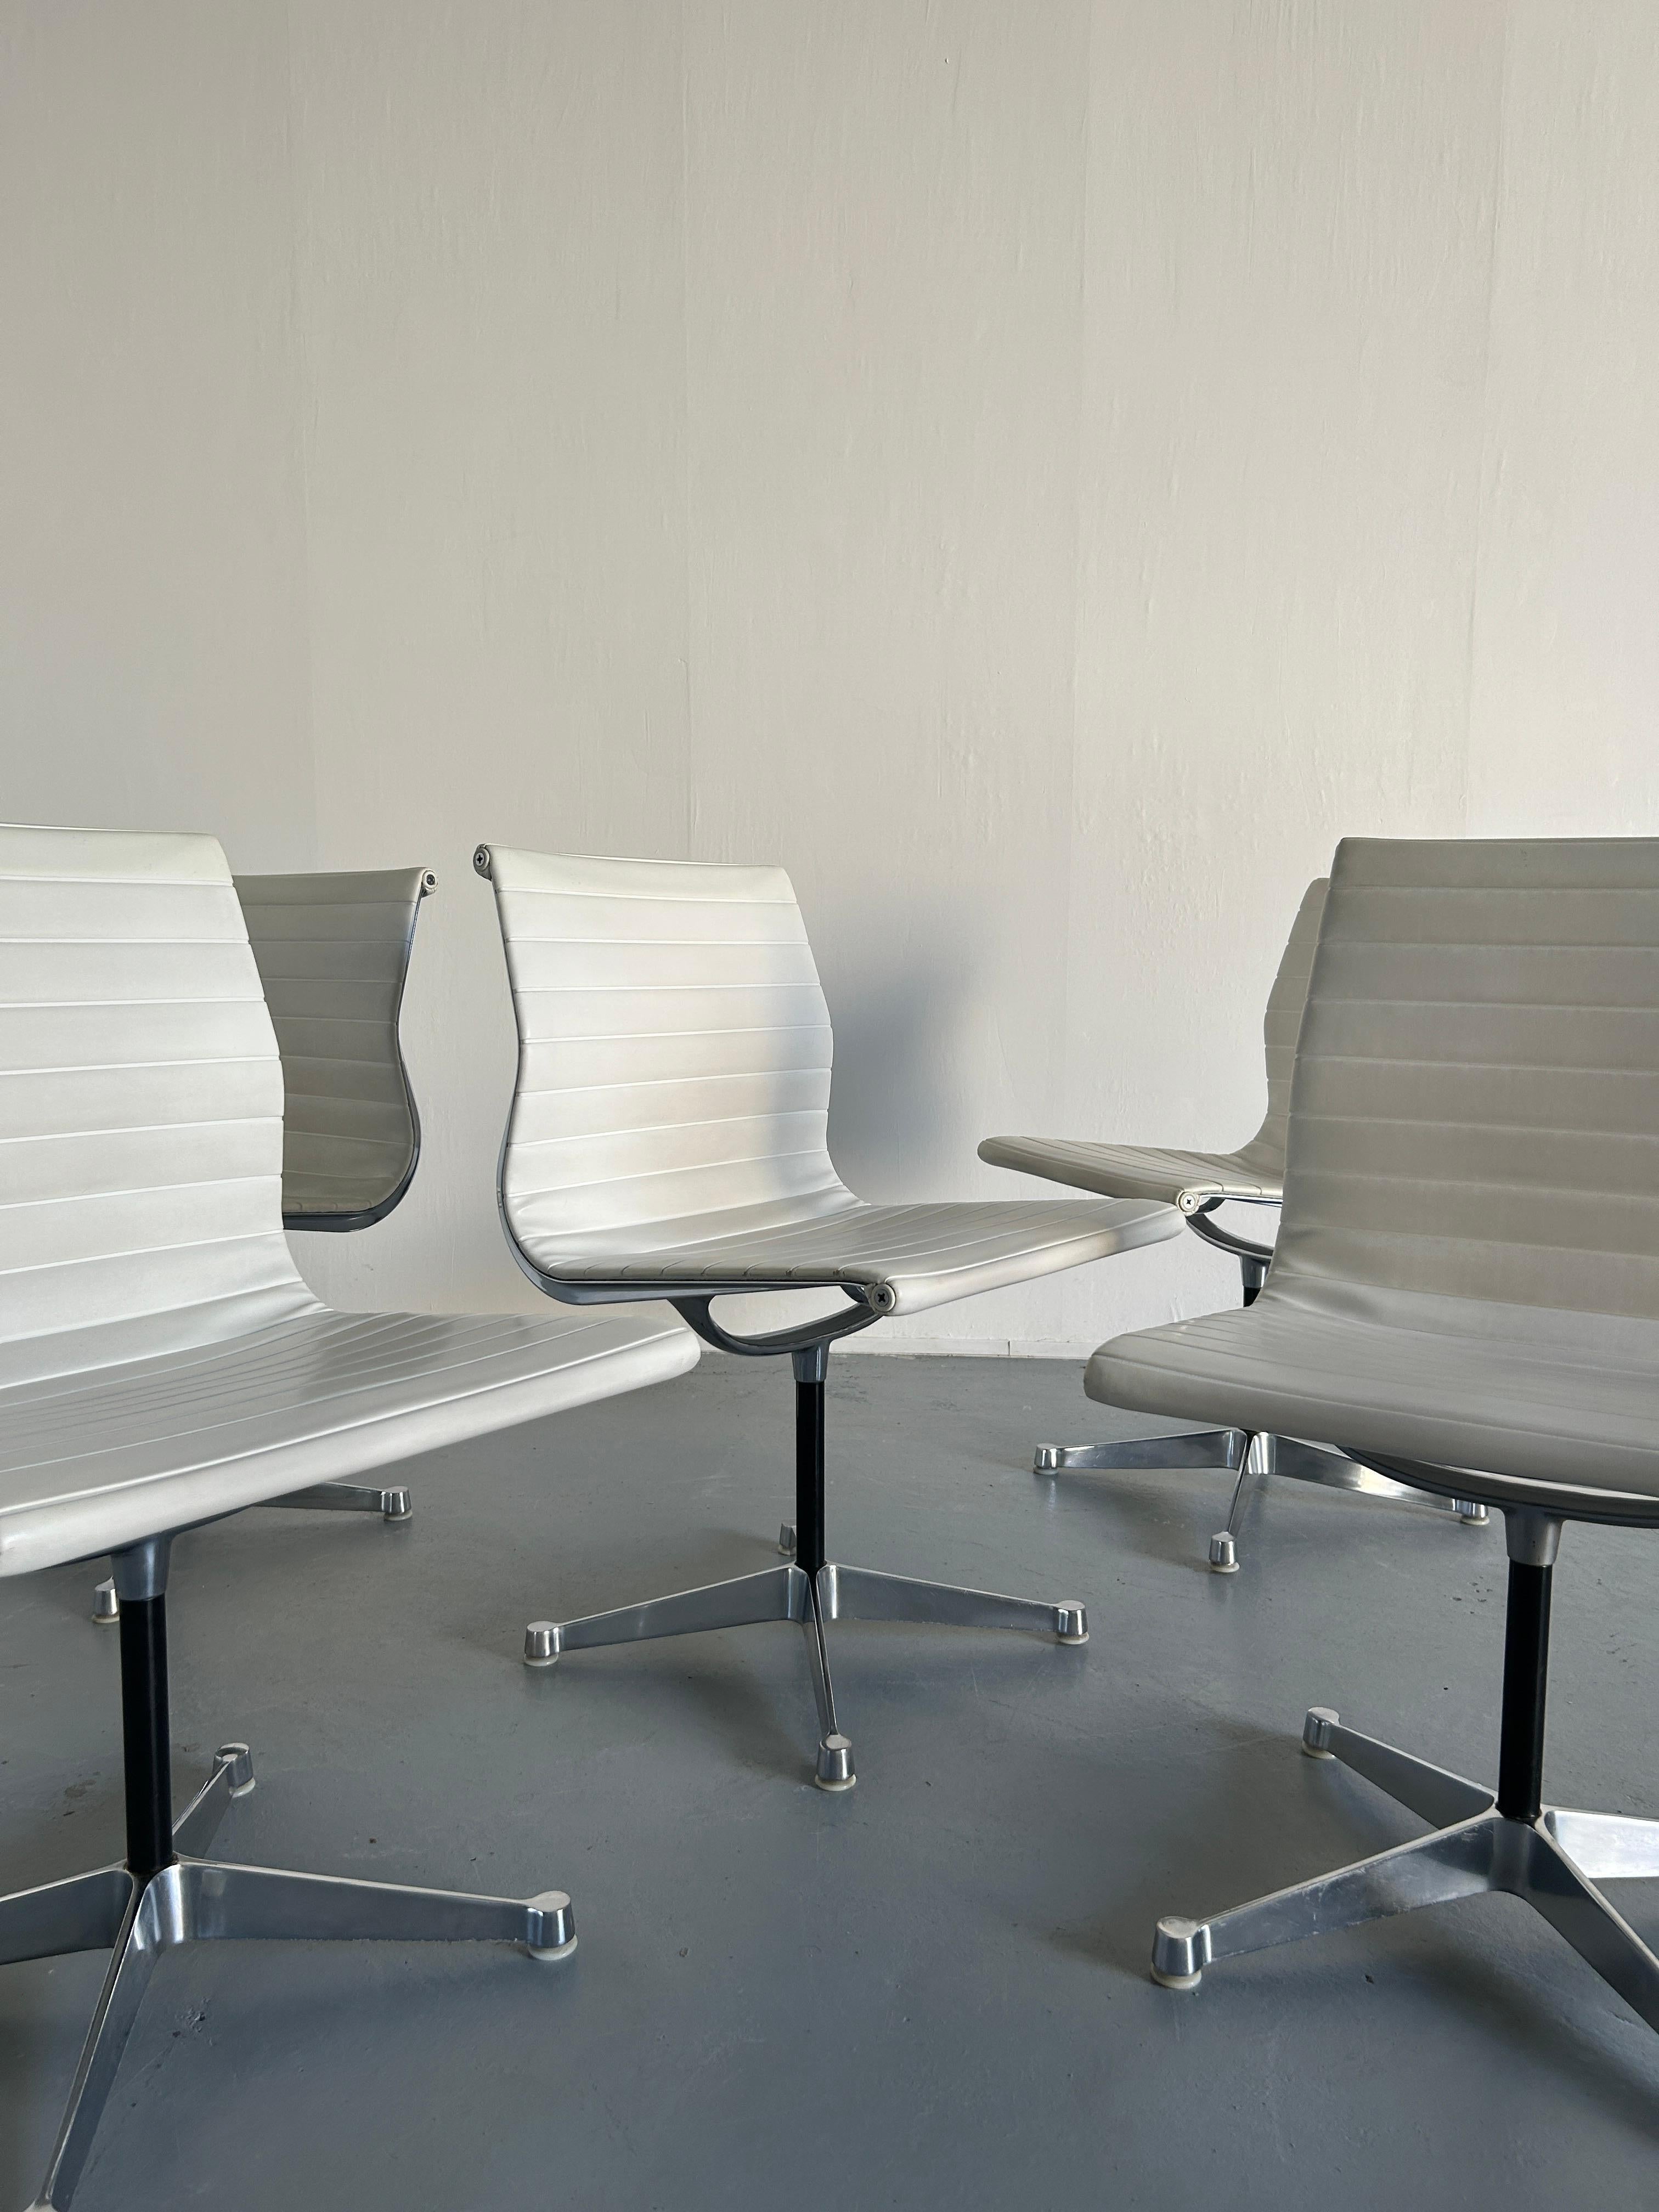 1 of 5 Original Vintage 'EA 107' Aluminium Desk Chairs by Charles & Ray Eames In Good Condition For Sale In Zagreb, HR